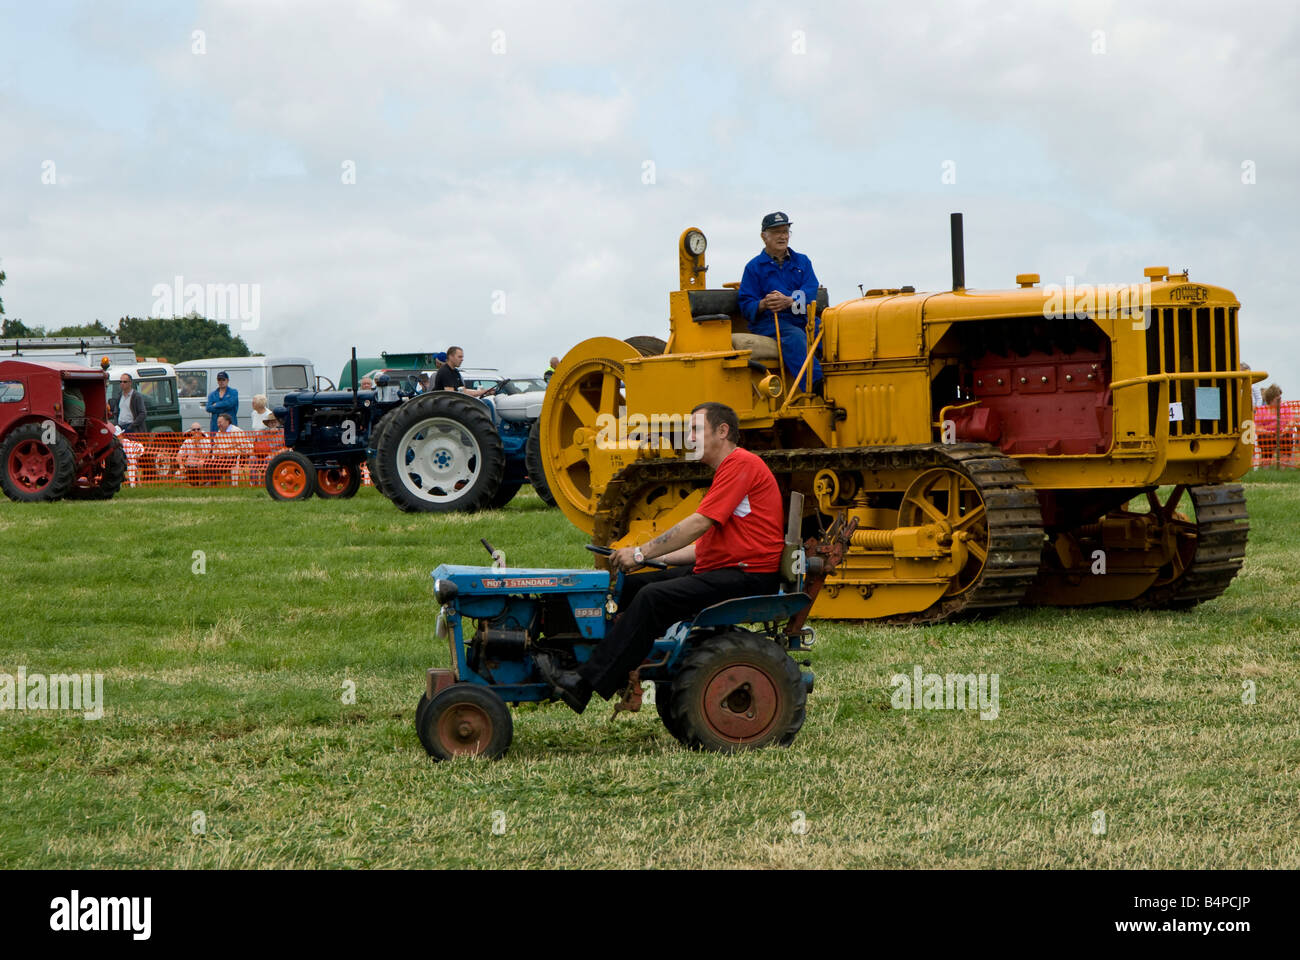 A Moto Standard mini tractor and Fowler caterpillar tracked vehicle at Bloxham Vintage Vehicle Show. UK Stock Photo